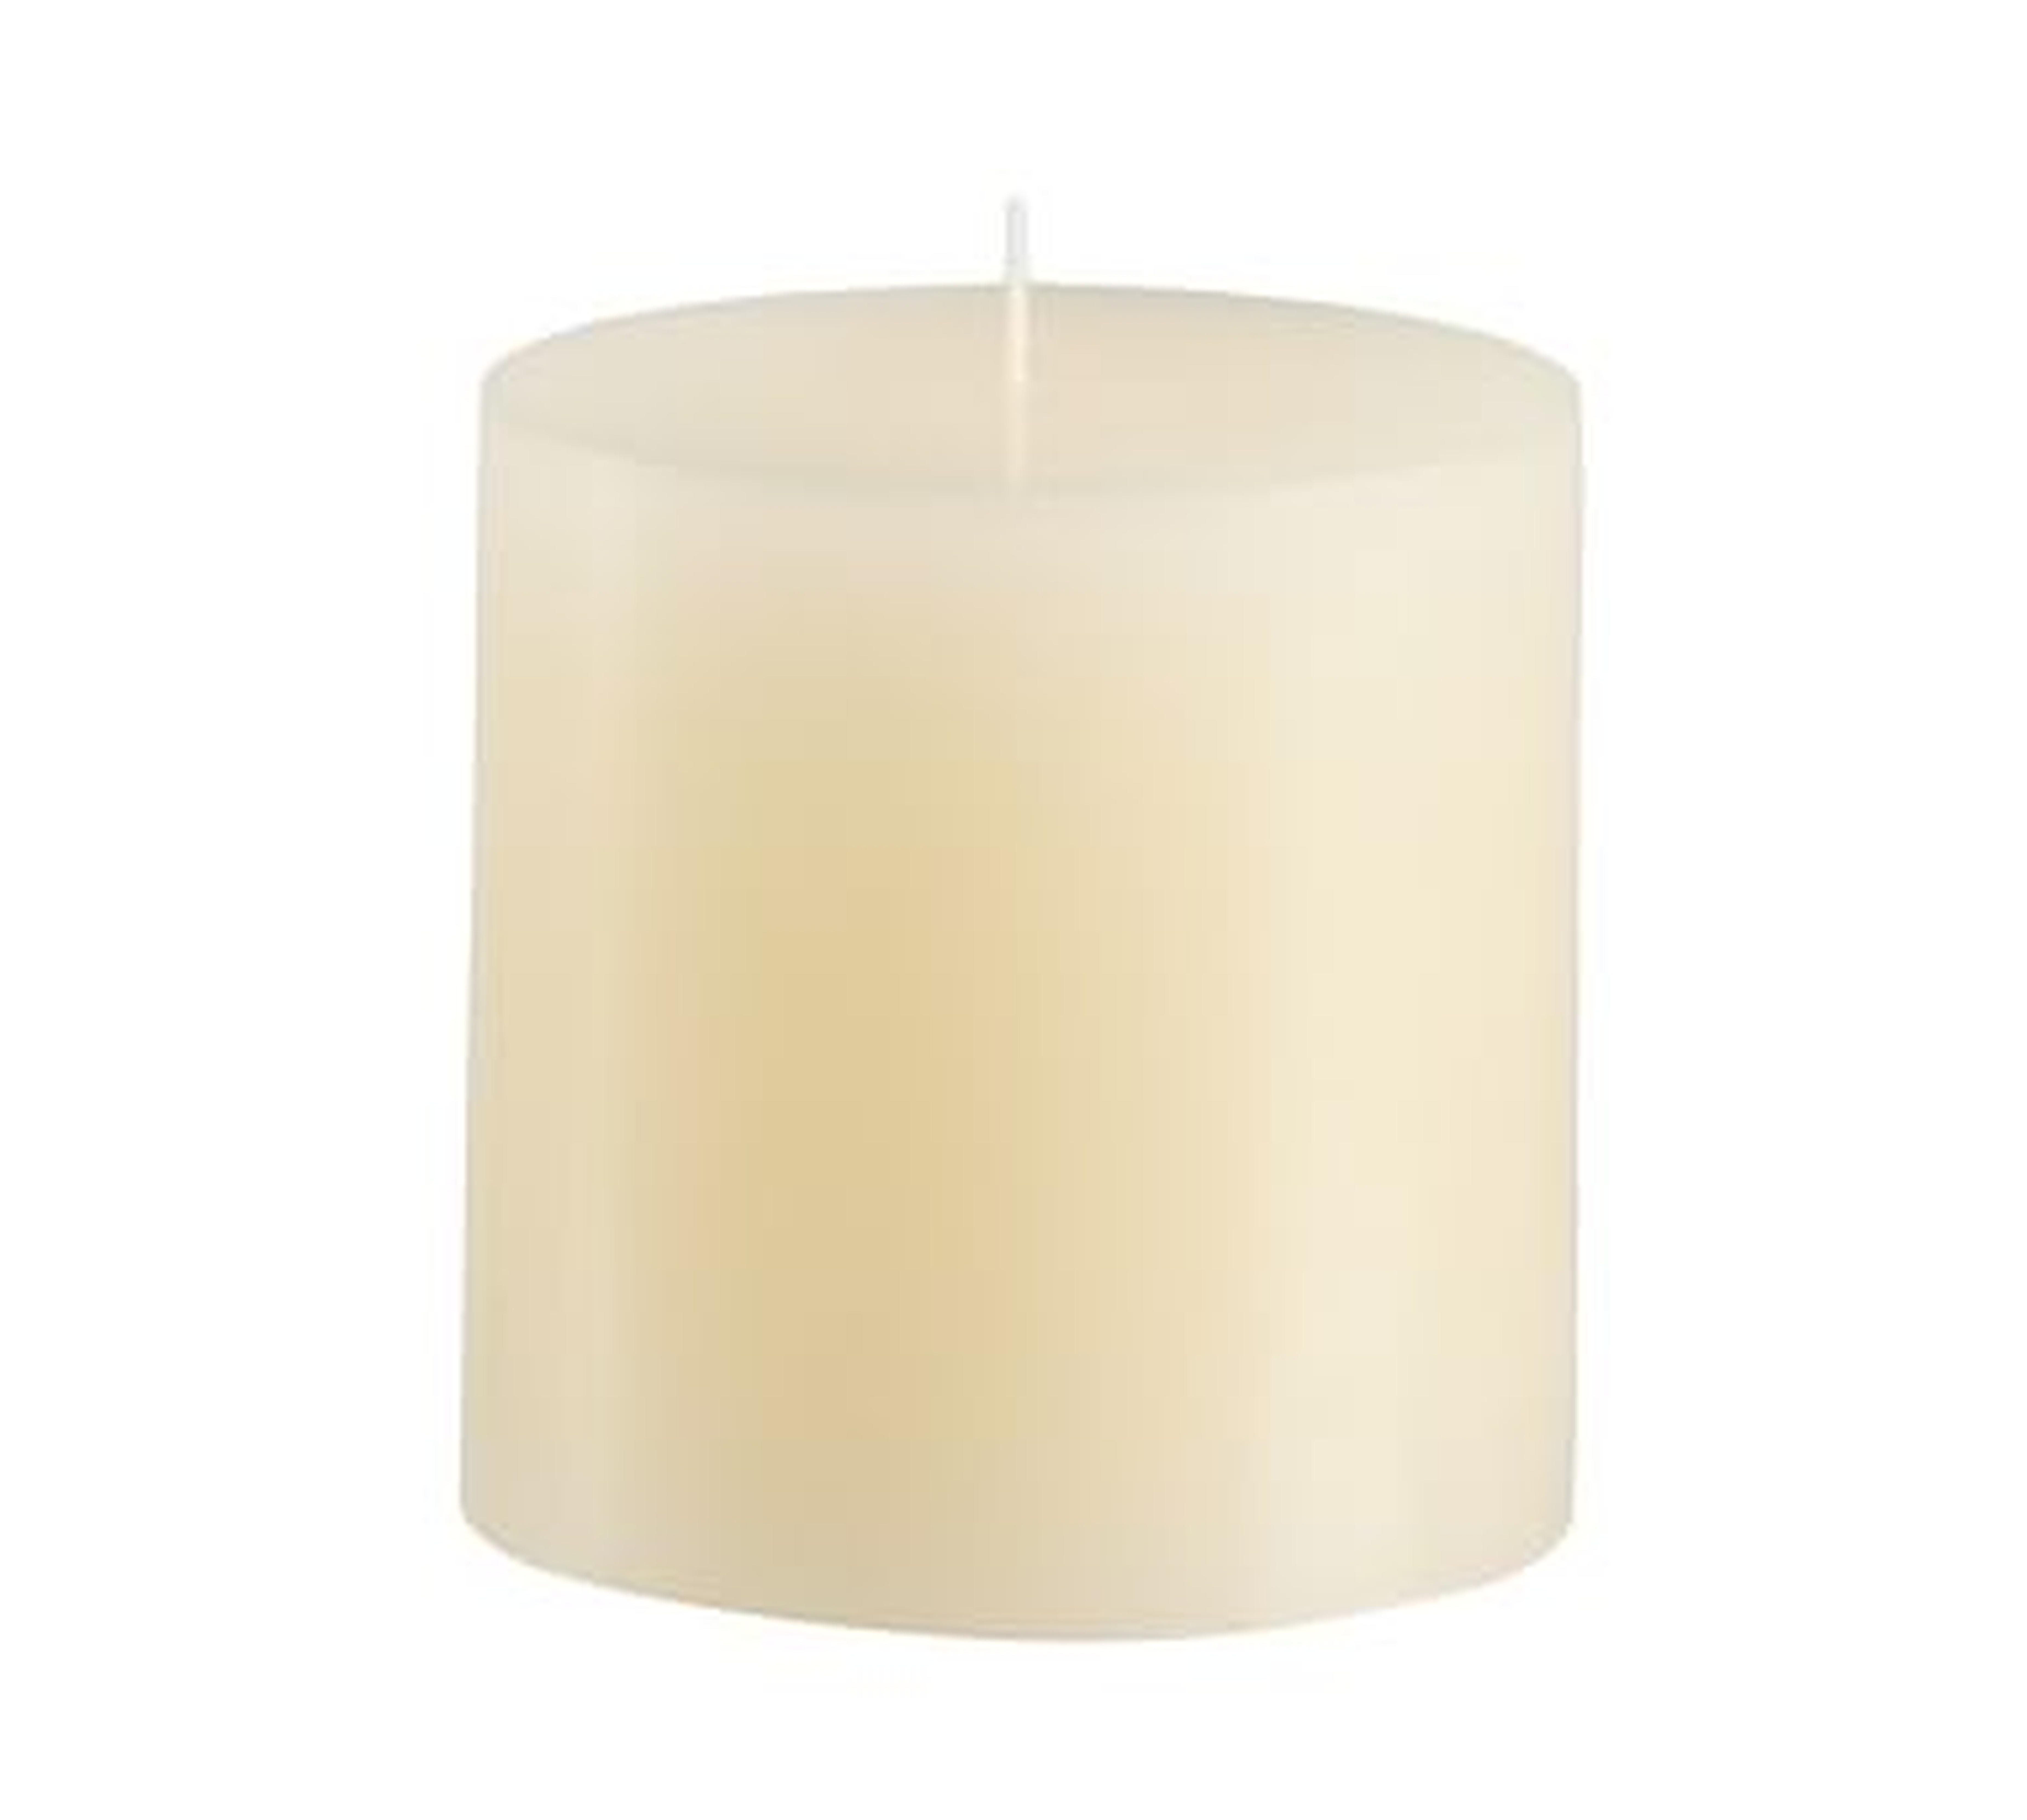 Unscented Wax Pillar Candle, 3"x3" - Ivory - Pottery Barn